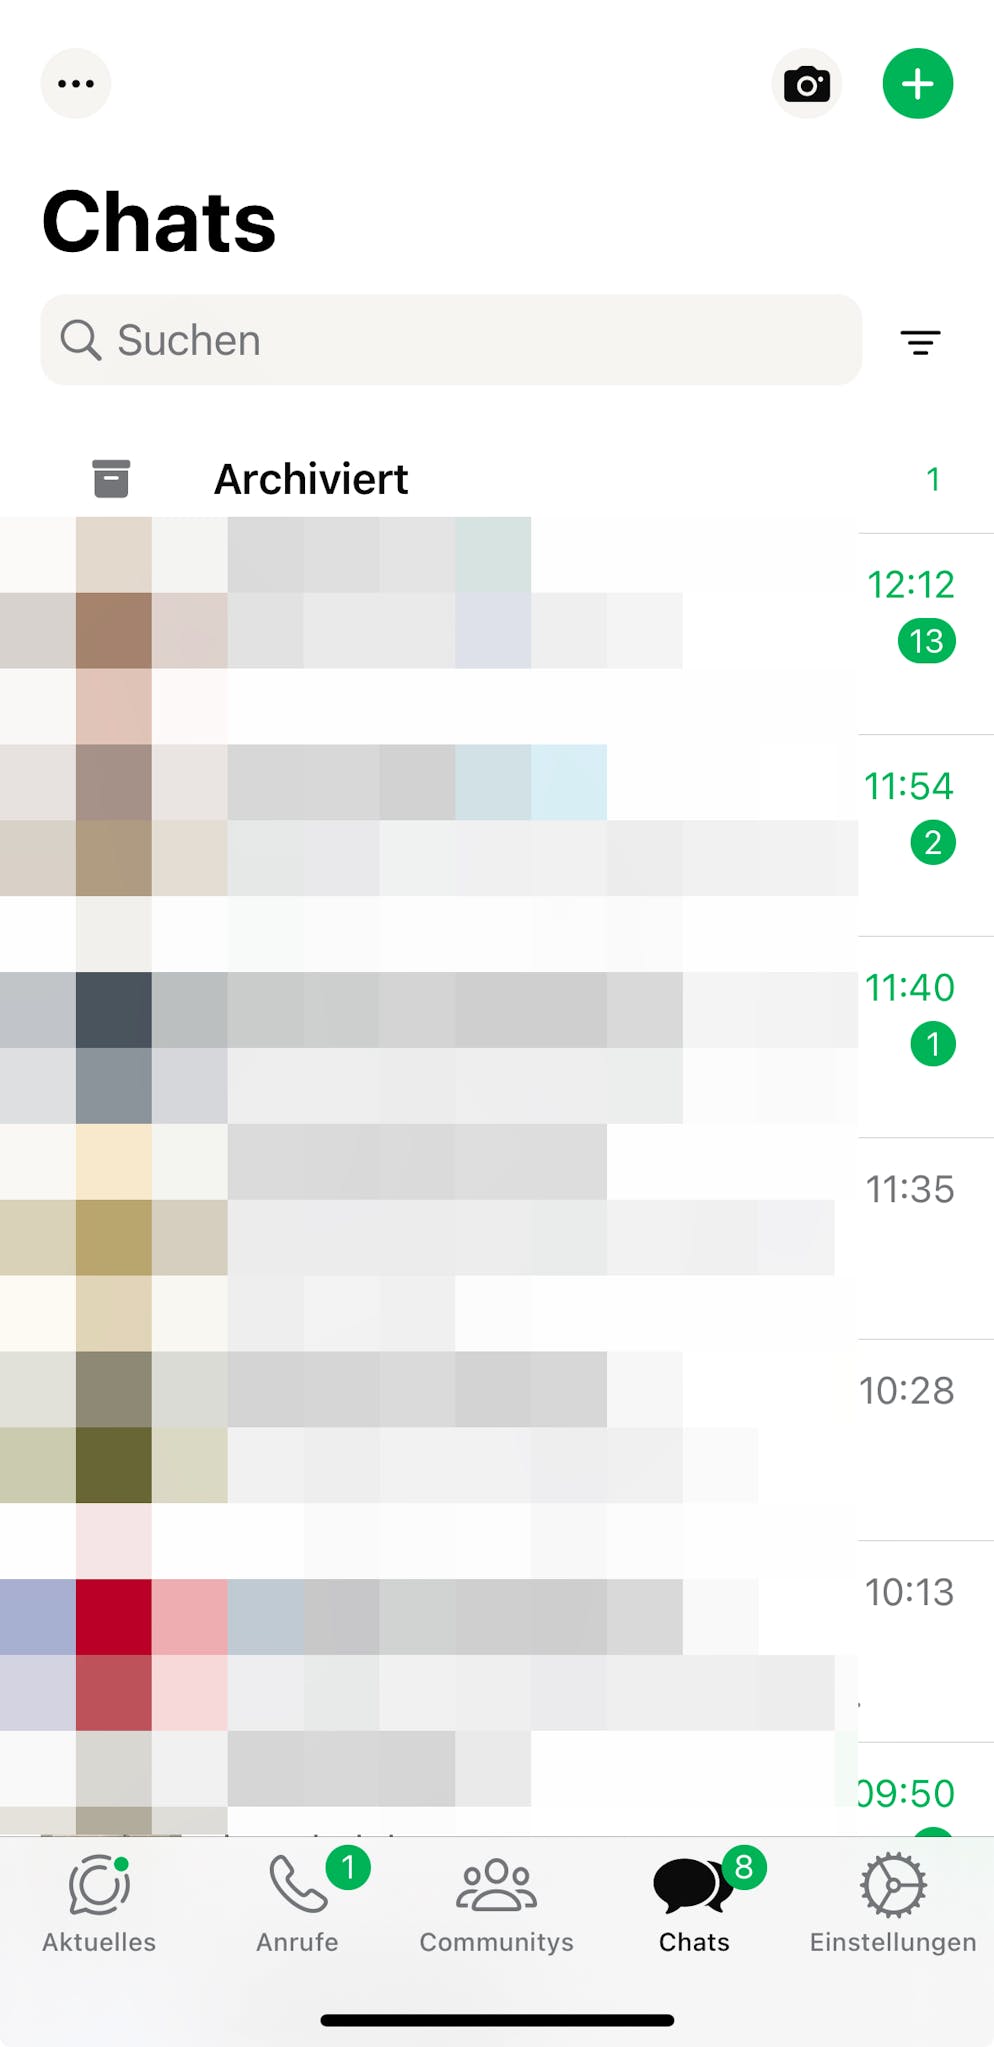 Whatsapp now welcomes you in green - and not all users are happy.